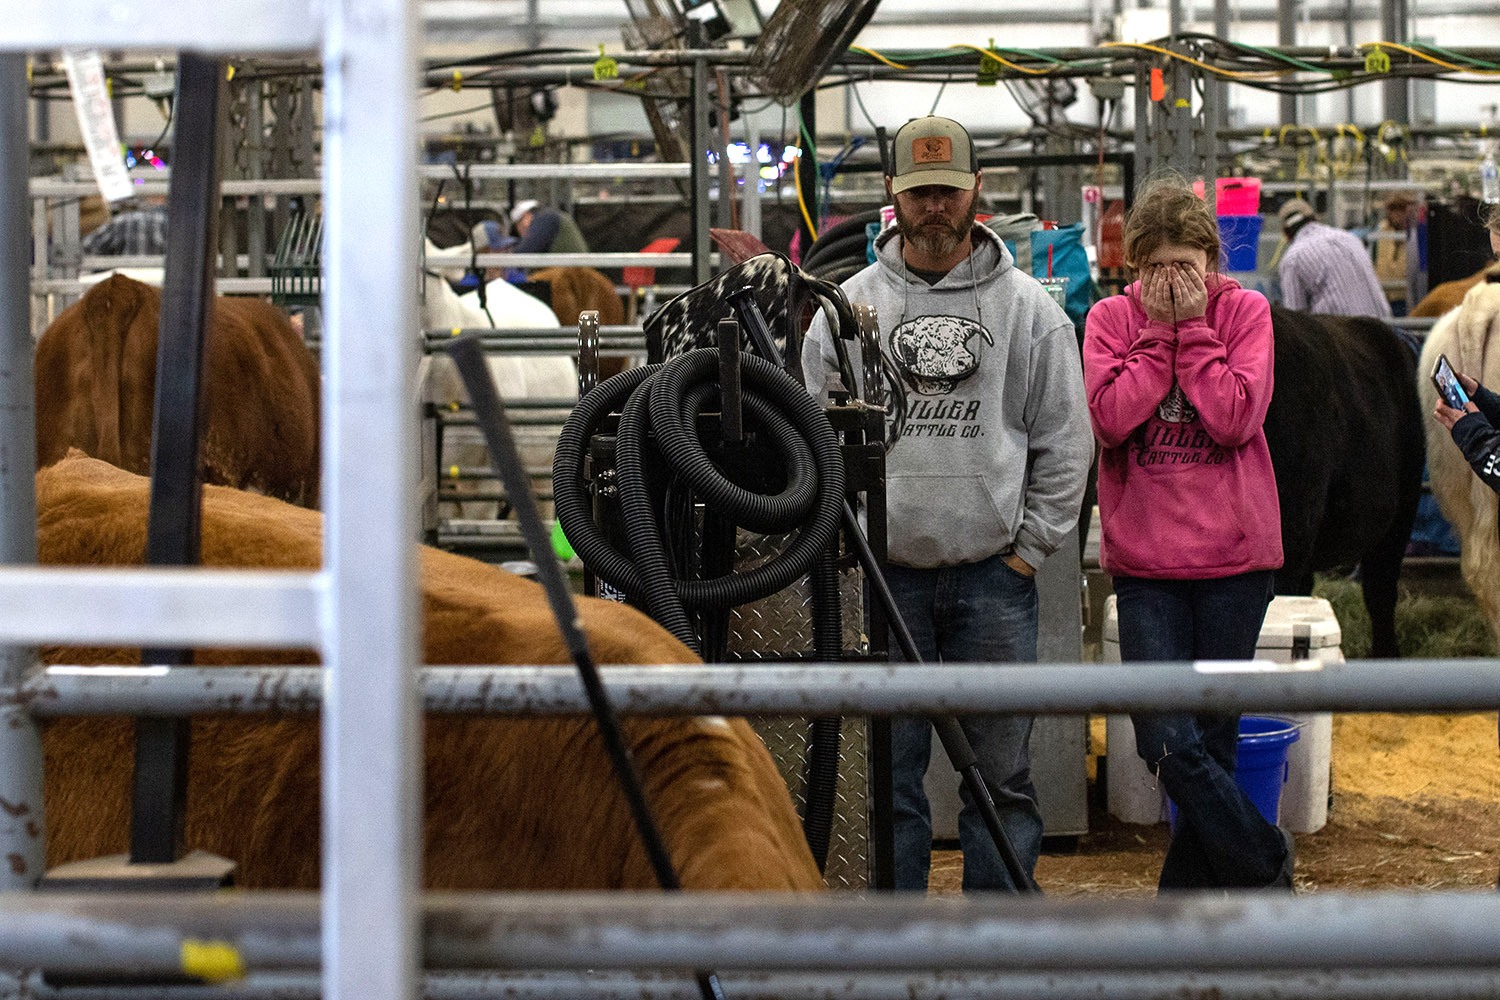 A girl rubs her eyes in the cattle barn at the San Antonio Stock Show and Rodeo on Friday, Feb. 18, 2022. Photo by Kaylee Greenlee Beal | Heron contributor